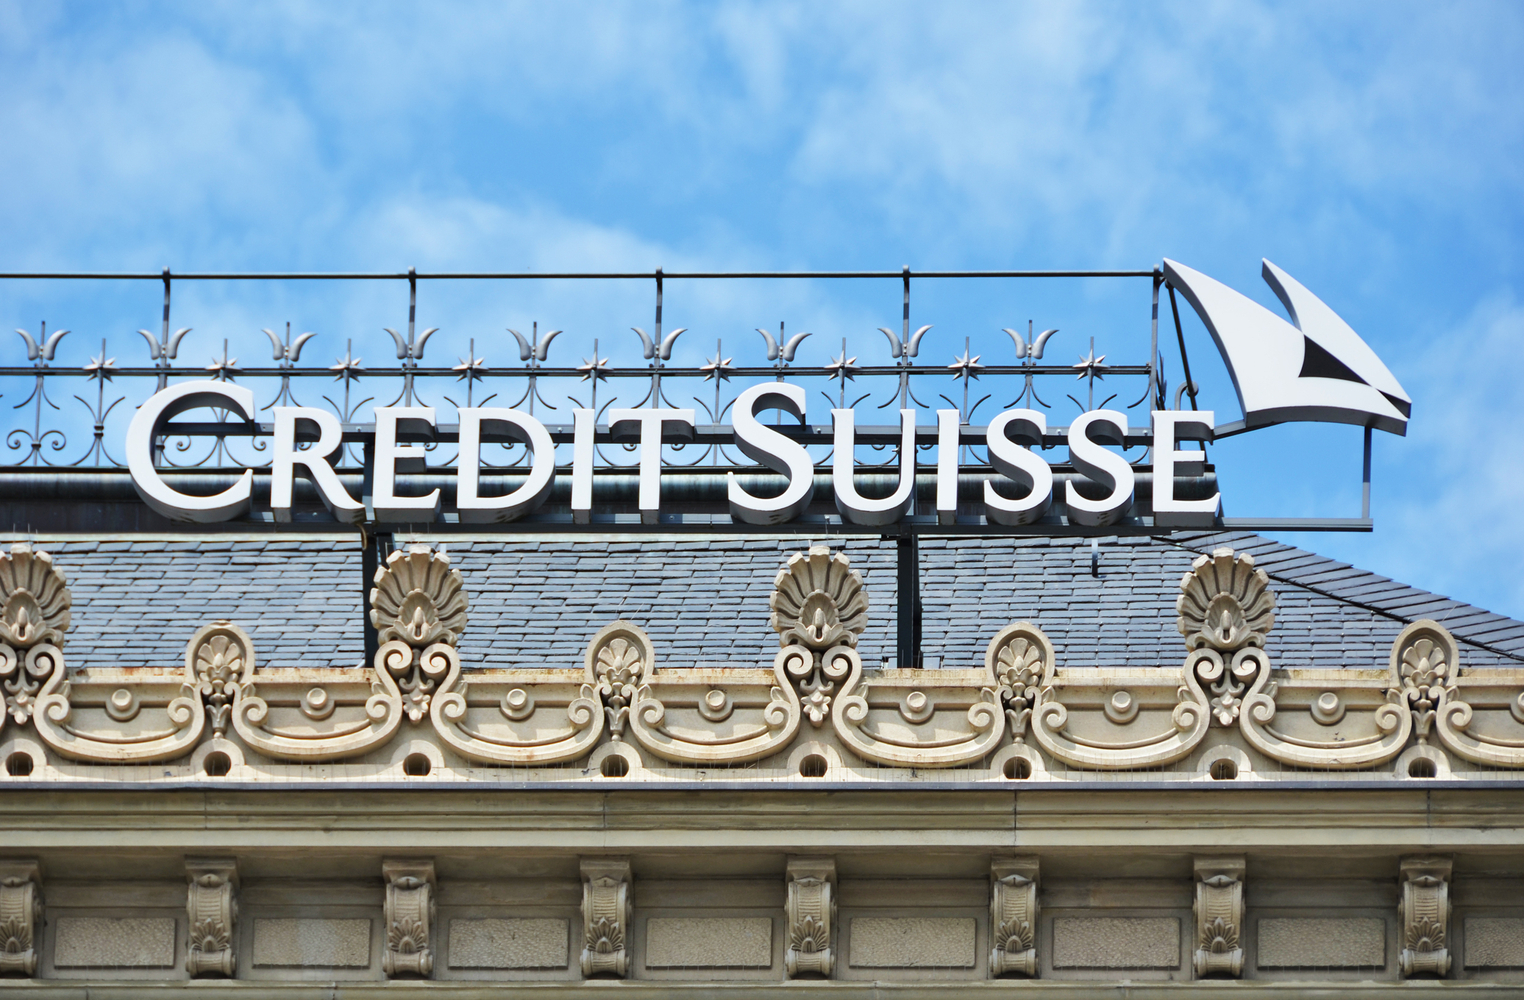 Credit Suisse Is Latest Bank to Charge Clients for Cash Deposits